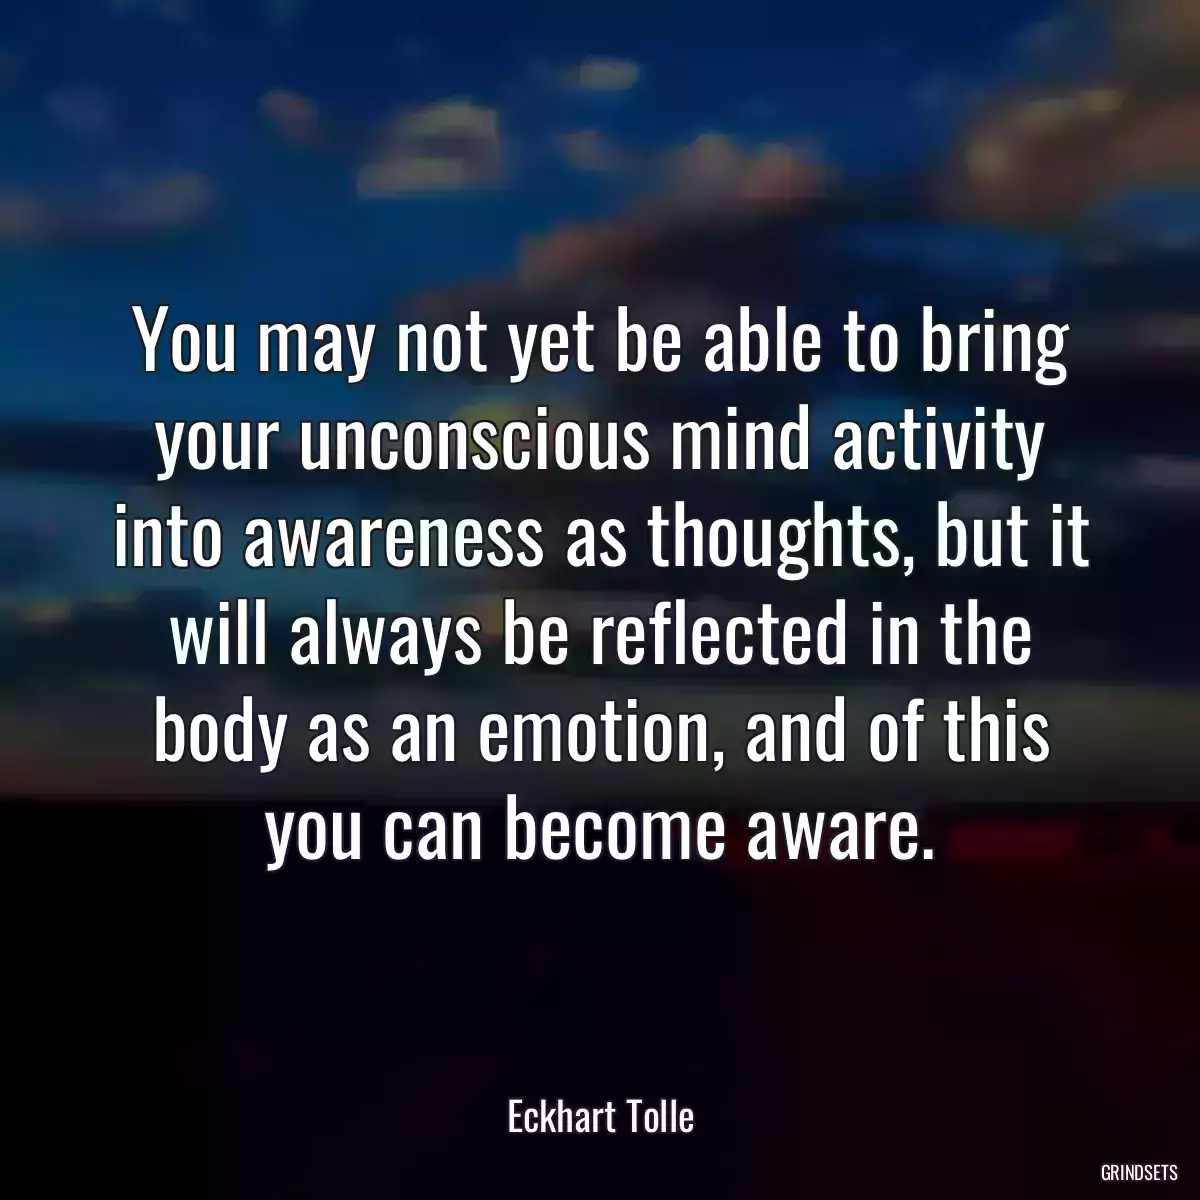 You may not yet be able to bring your unconscious mind activity into awareness as thoughts, but it will always be reflected in the body as an emotion, and of this you can become aware.